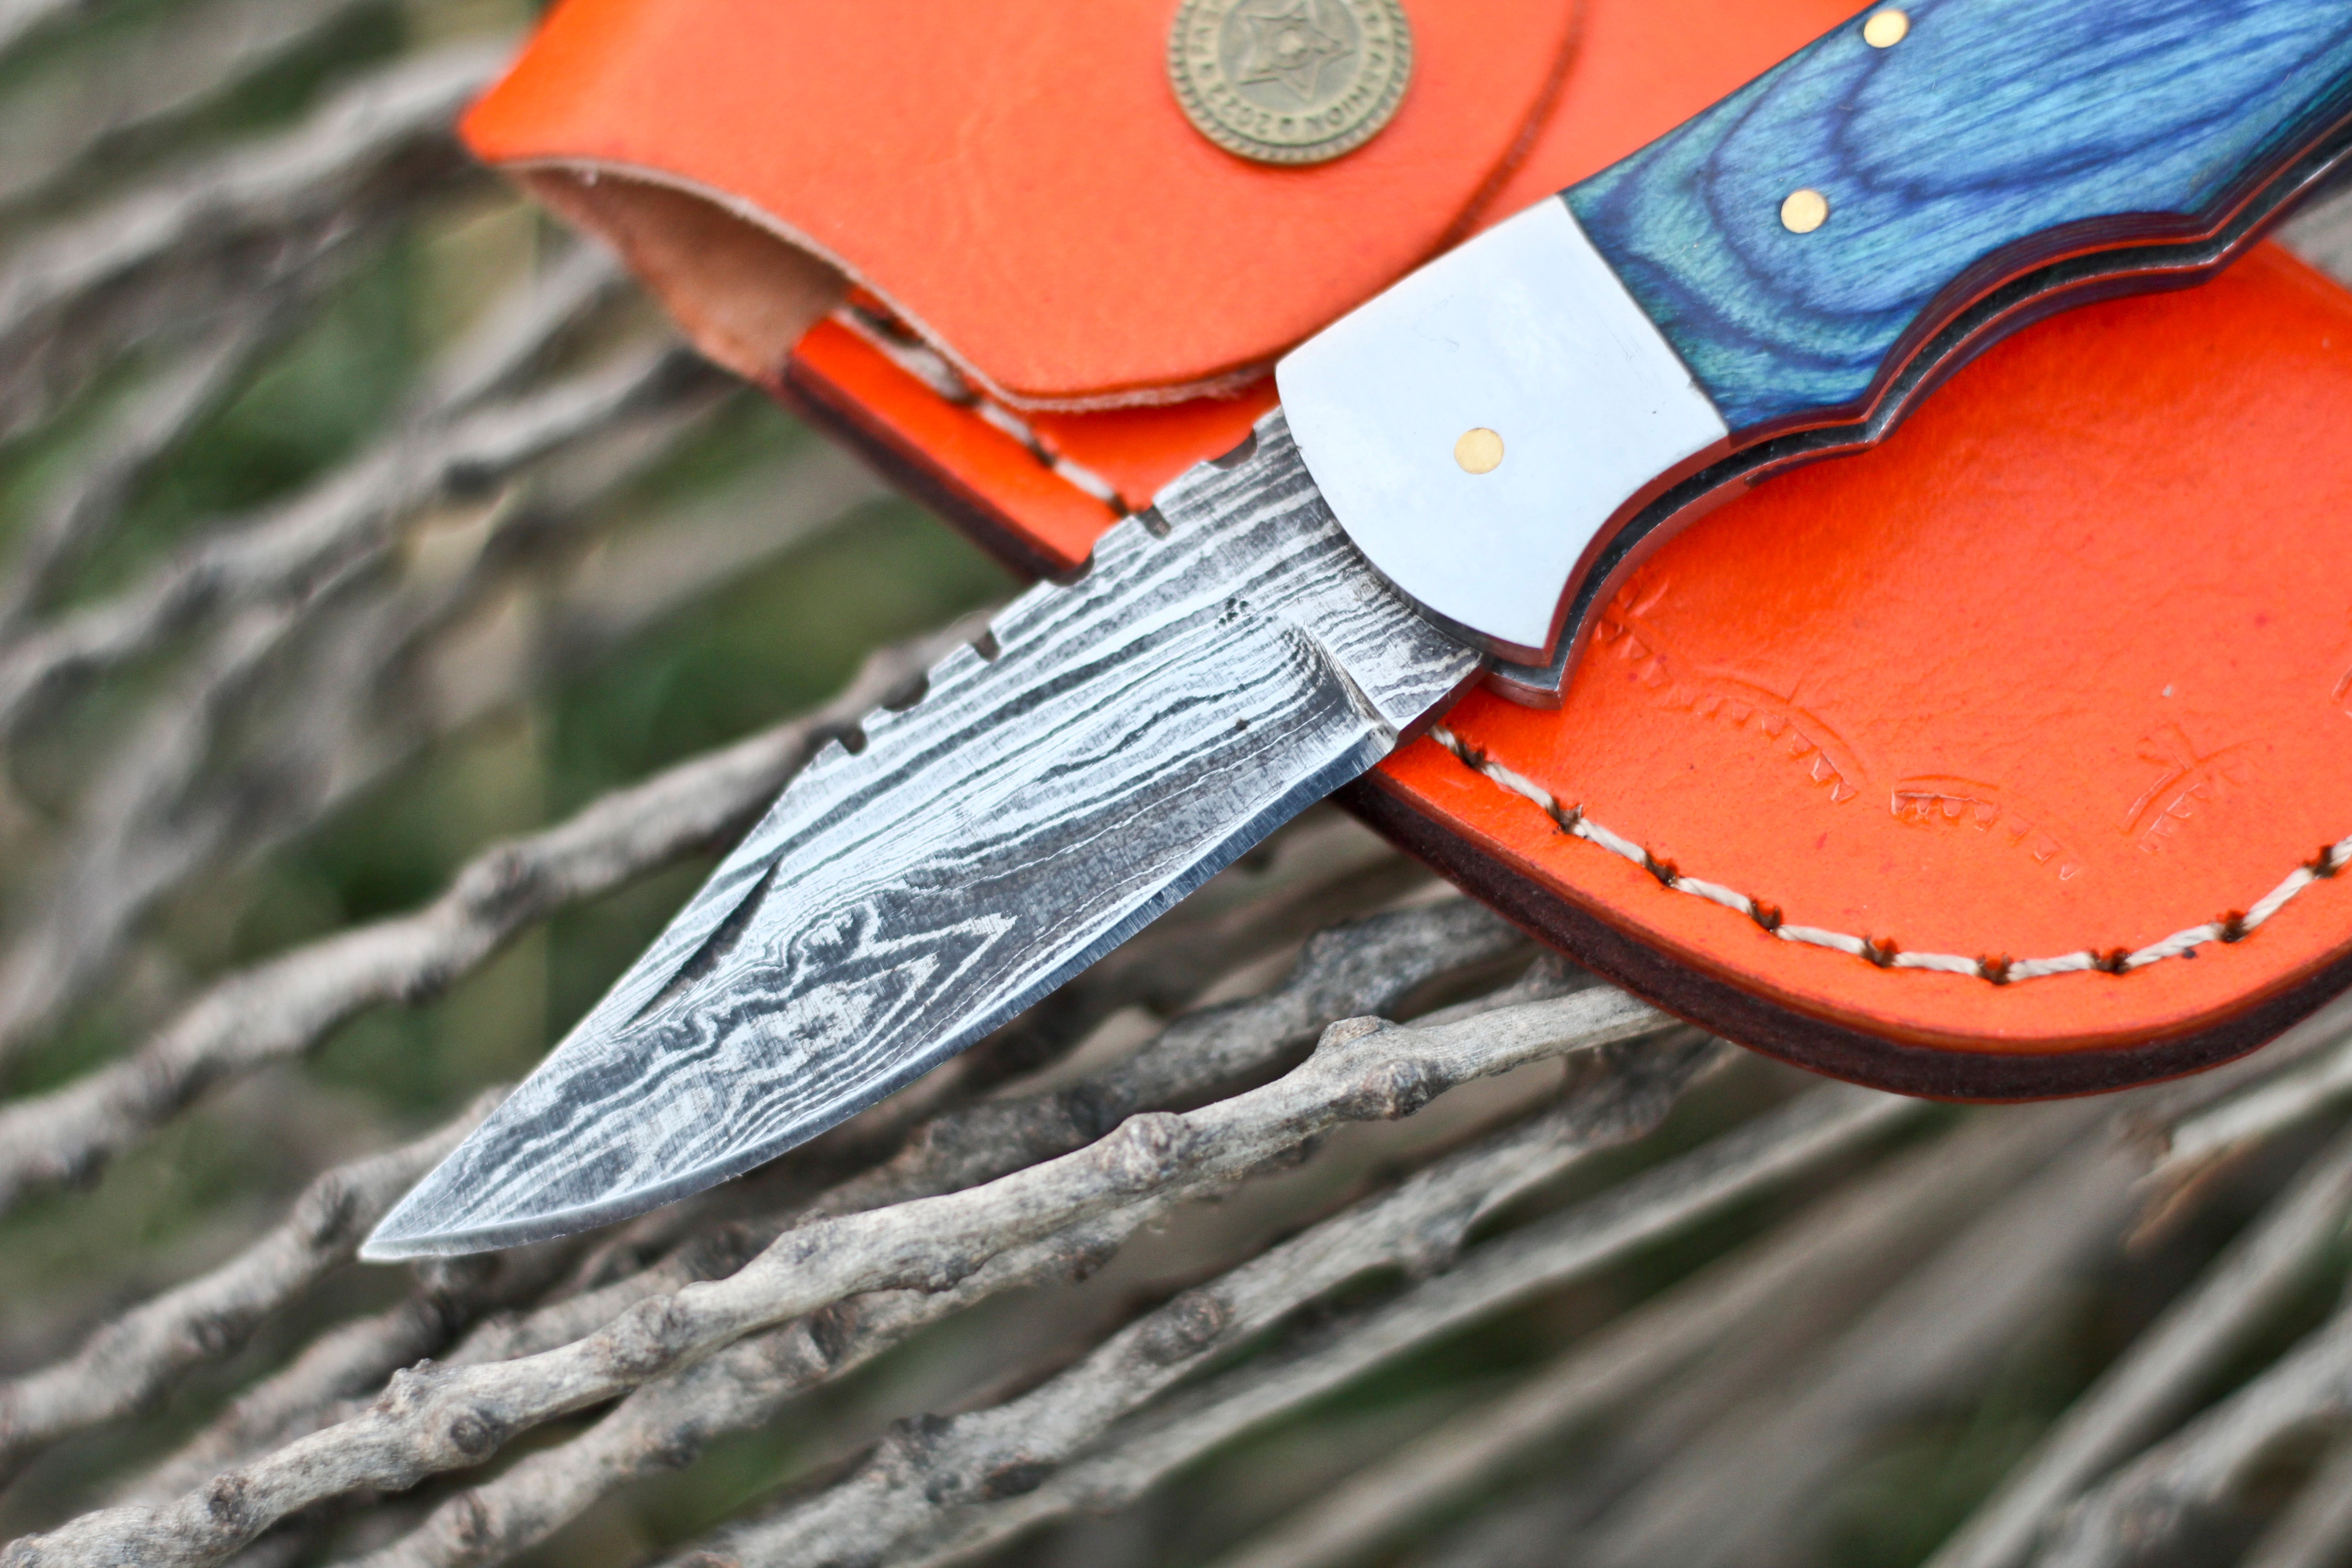 <h3>Handmade Damascus Steel Hunting Folding Knife with Pocket Clip - Camping Folding Blade With Wood Handle</h3>